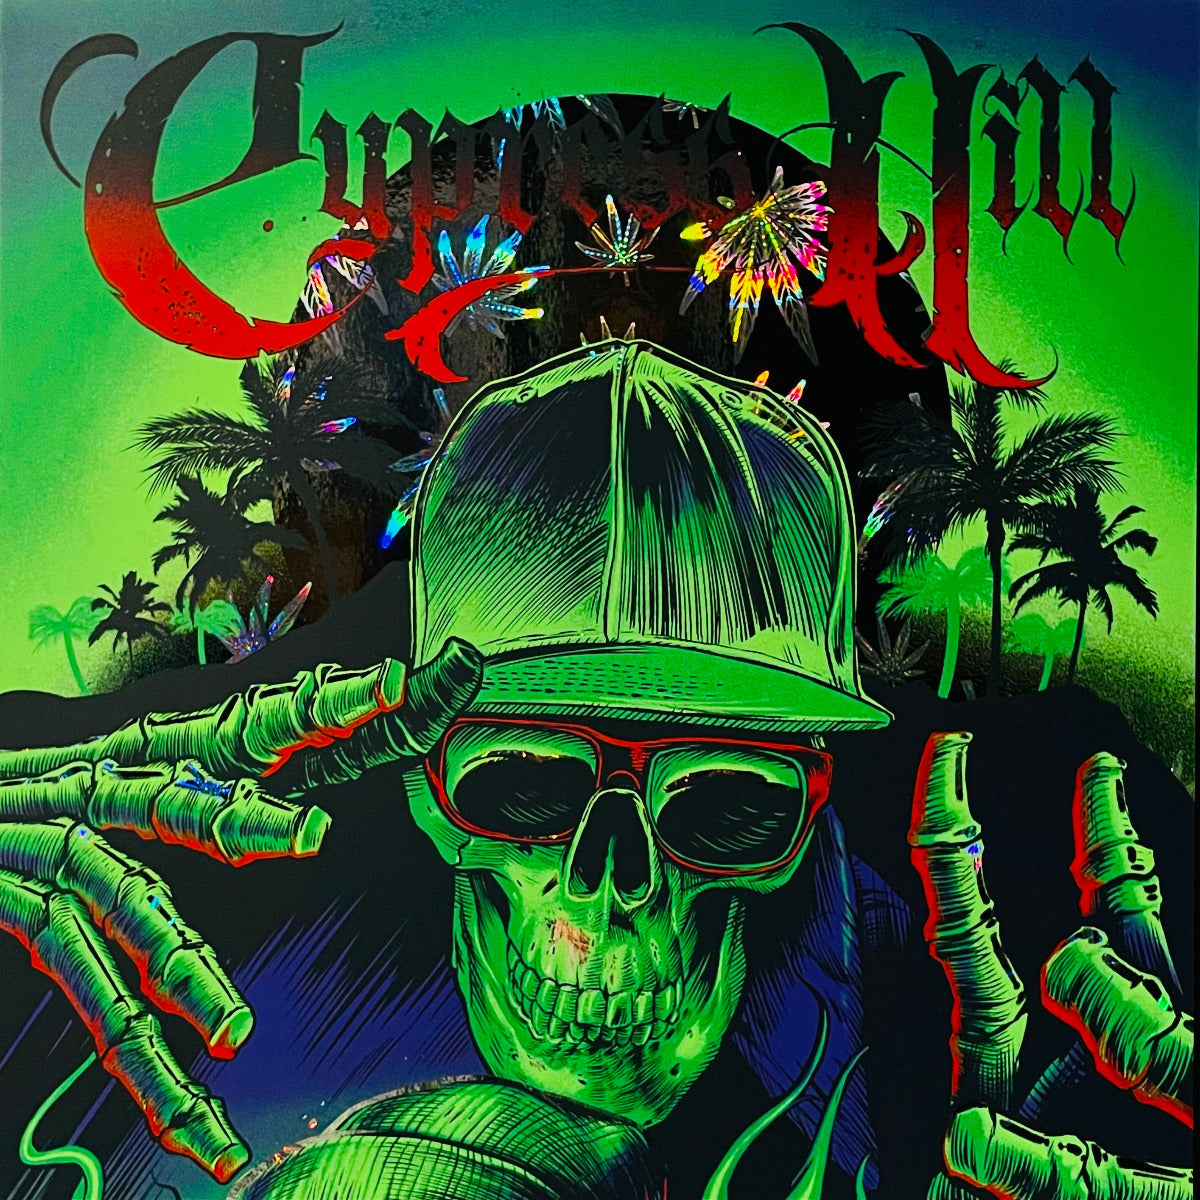 Cypress Hill "Insane In The Brain" (Weed Foil Printer's Proof)